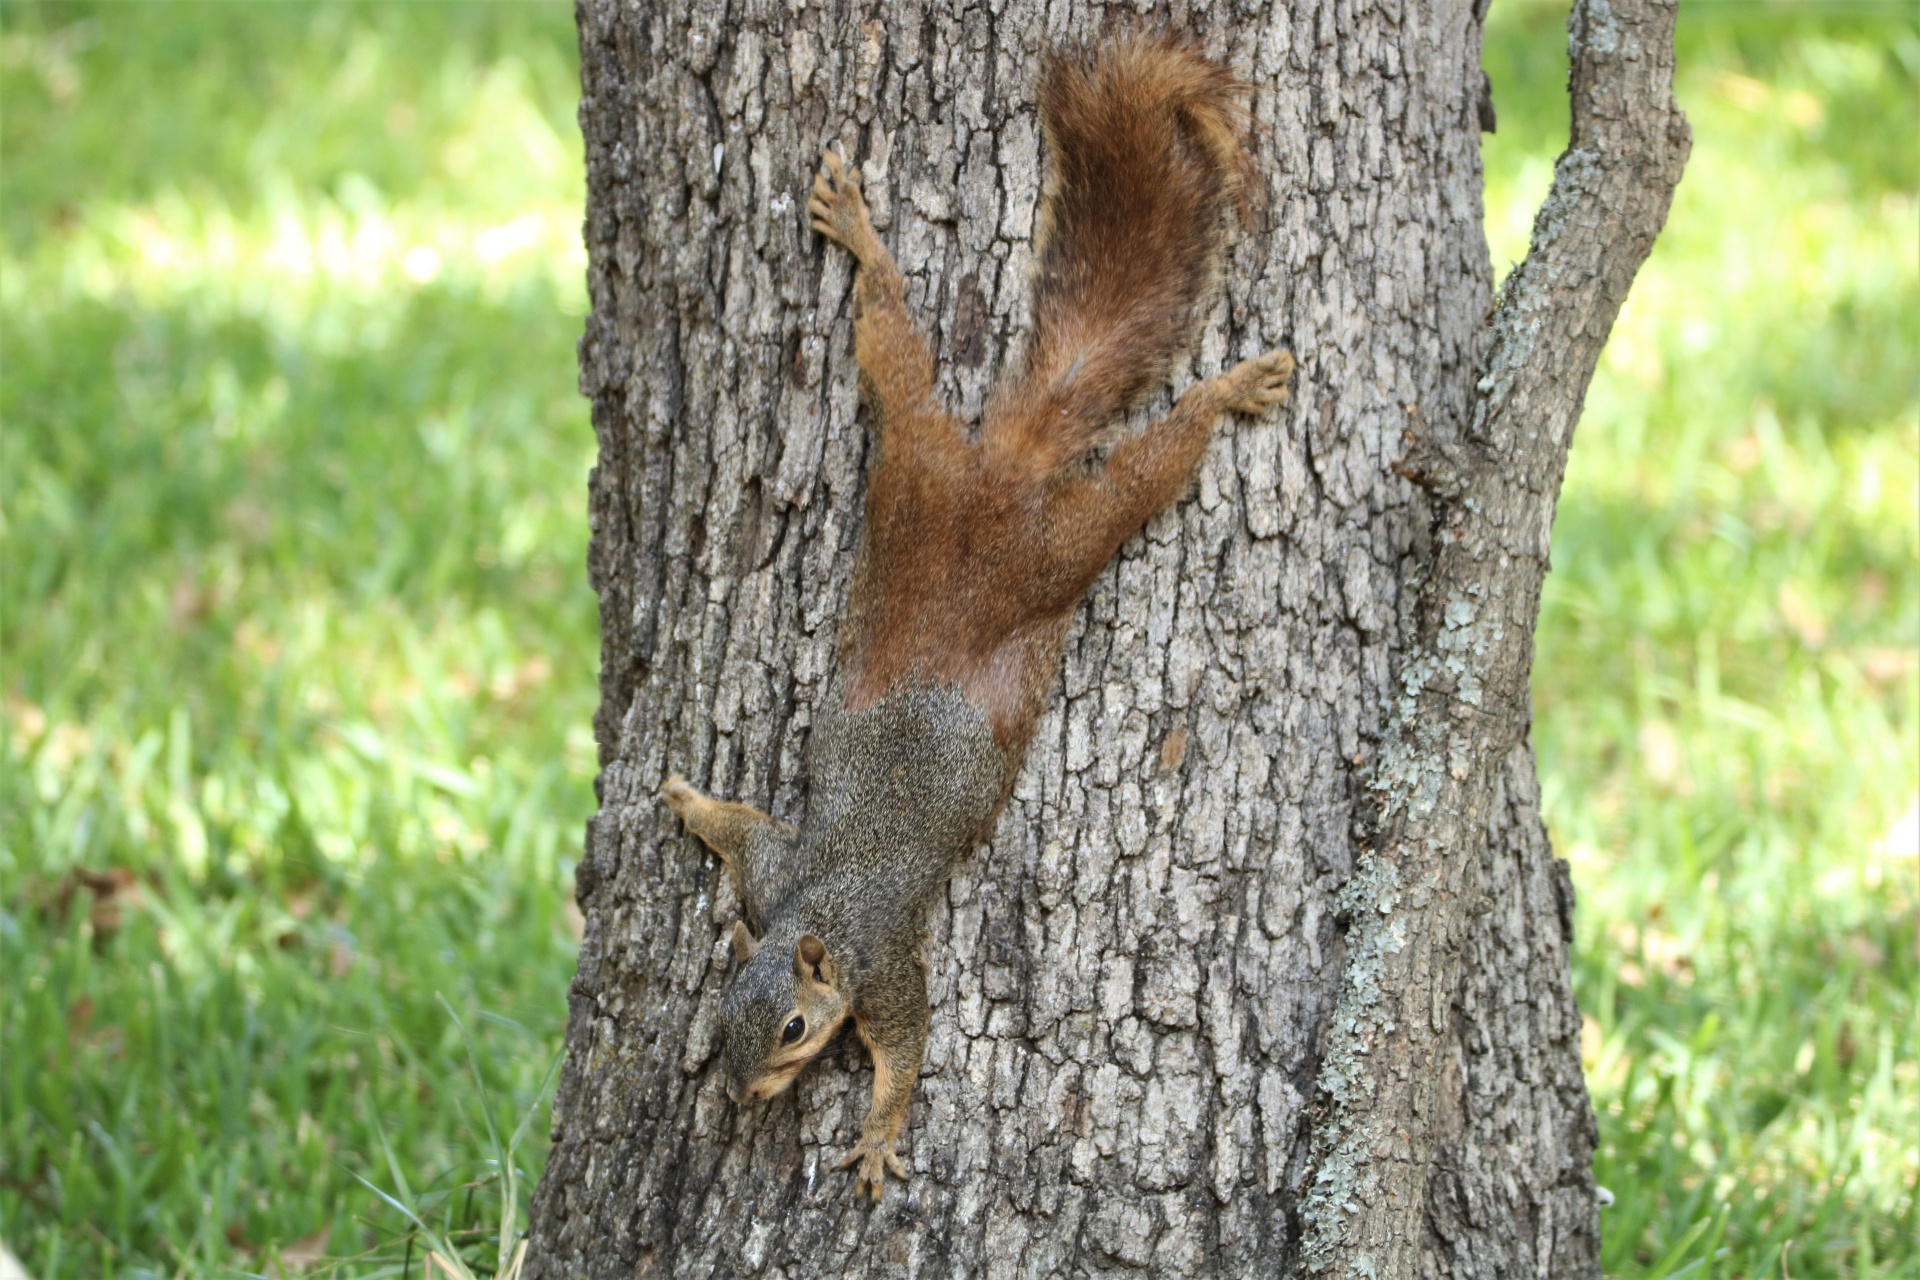 A cute little fox squirrel is stretched out, upside down, on the side of a tree with a green grass background.